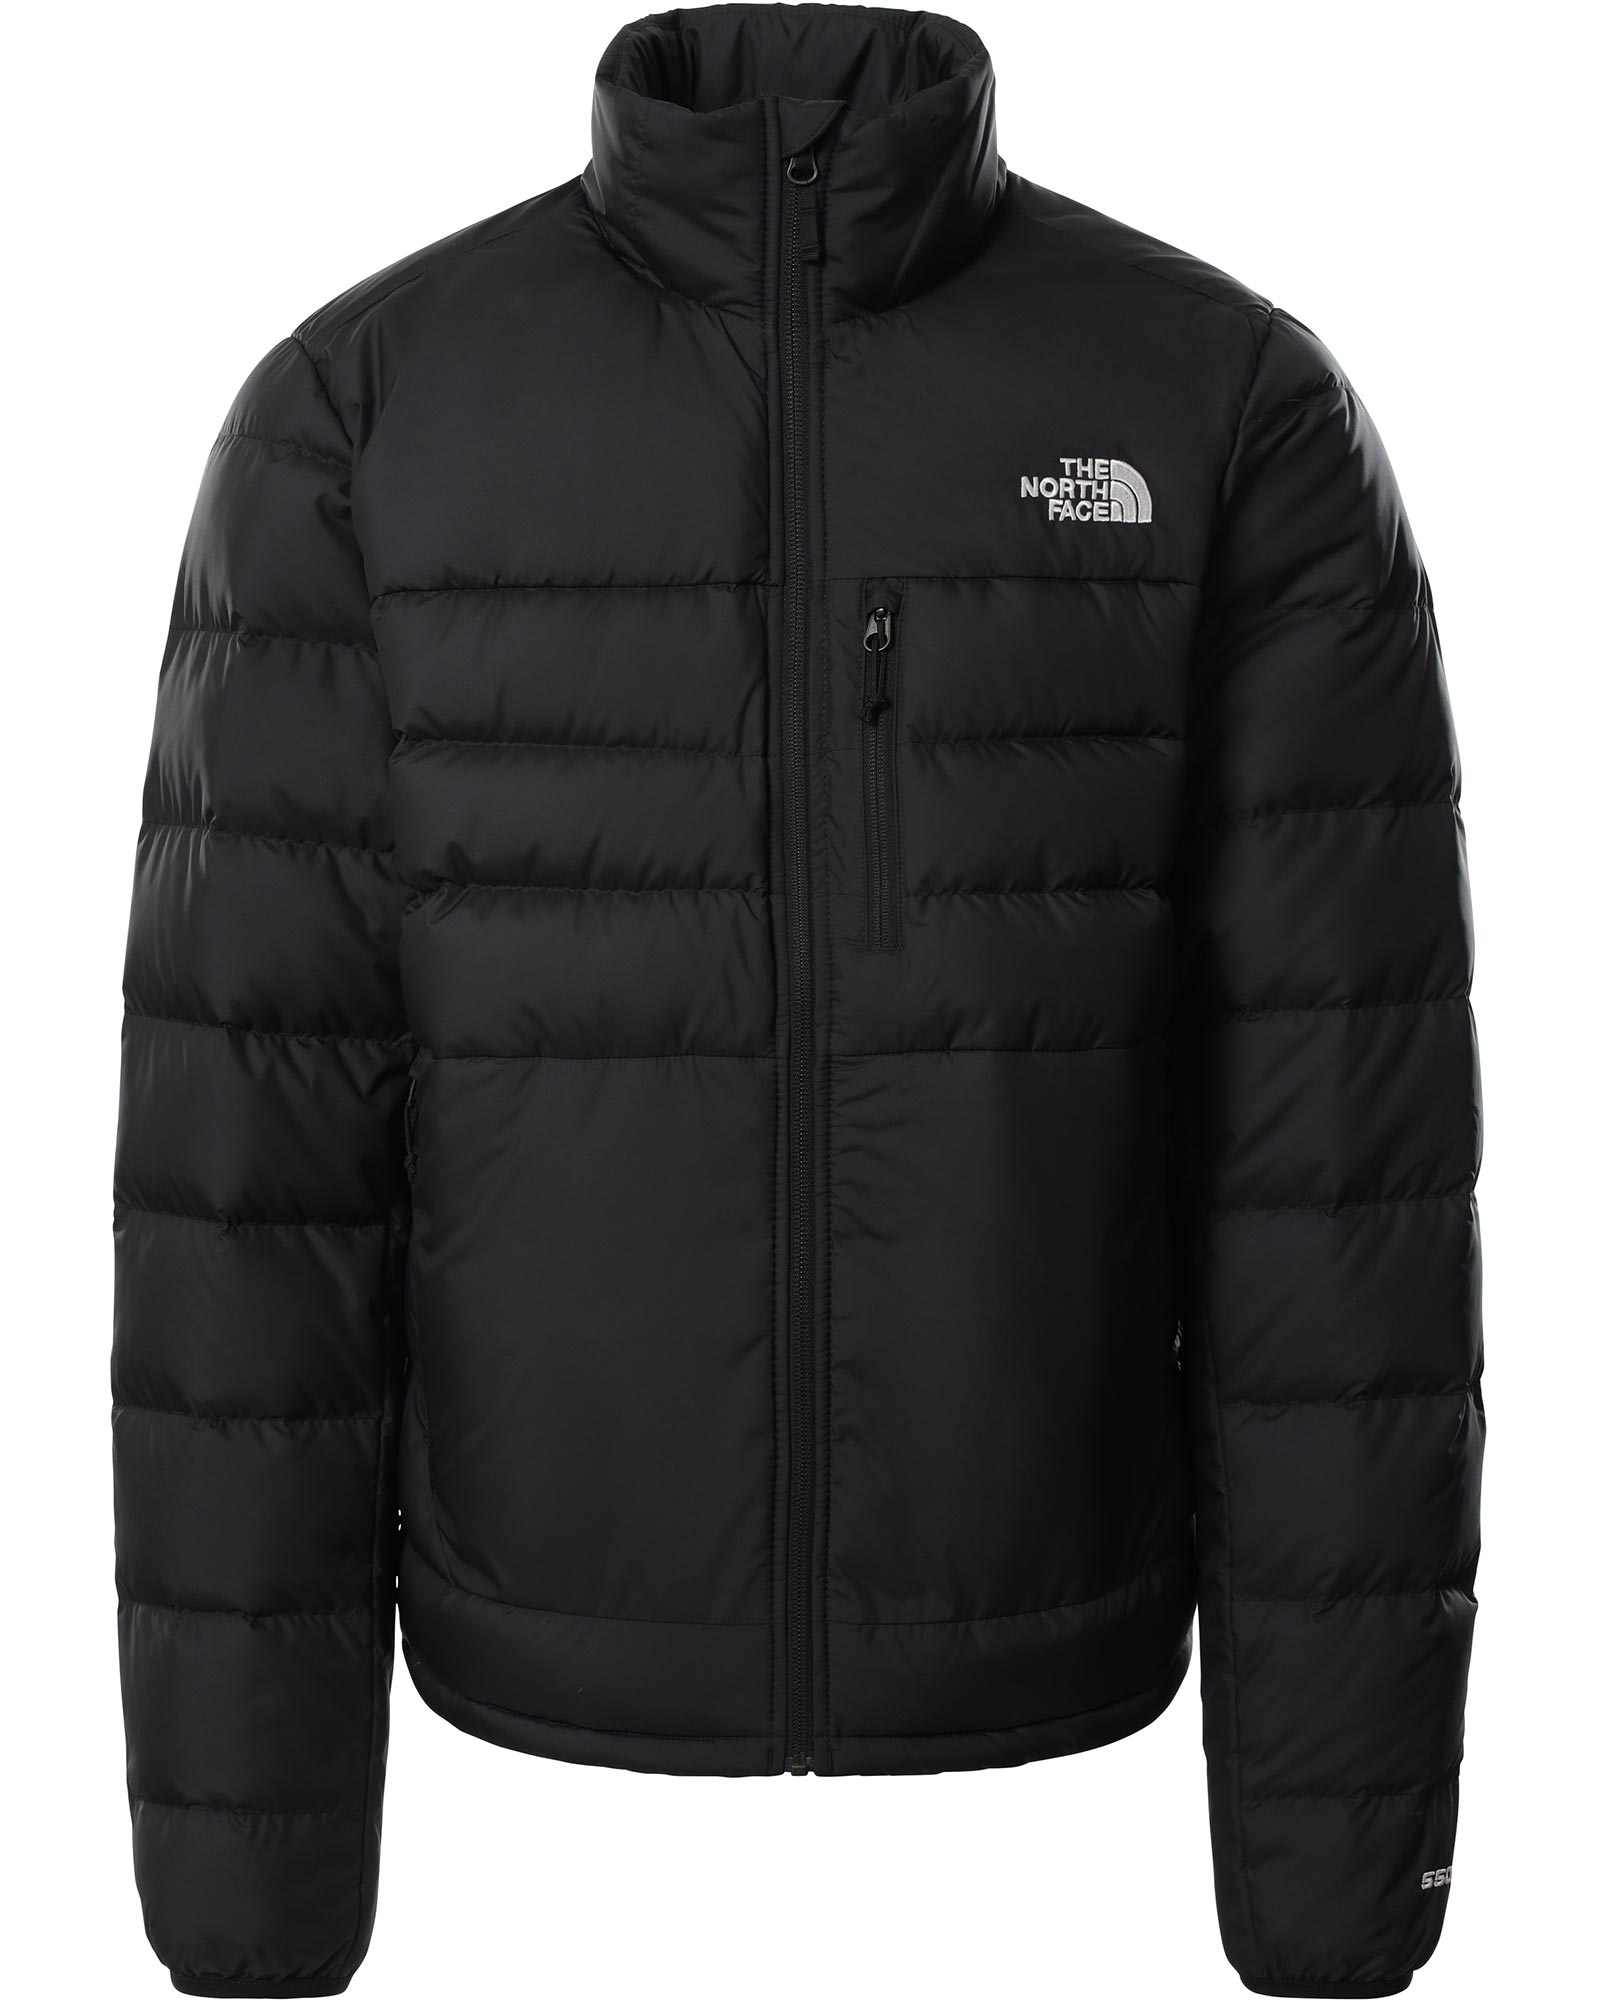 The North Face Aconcagua 2 Mens Jacket